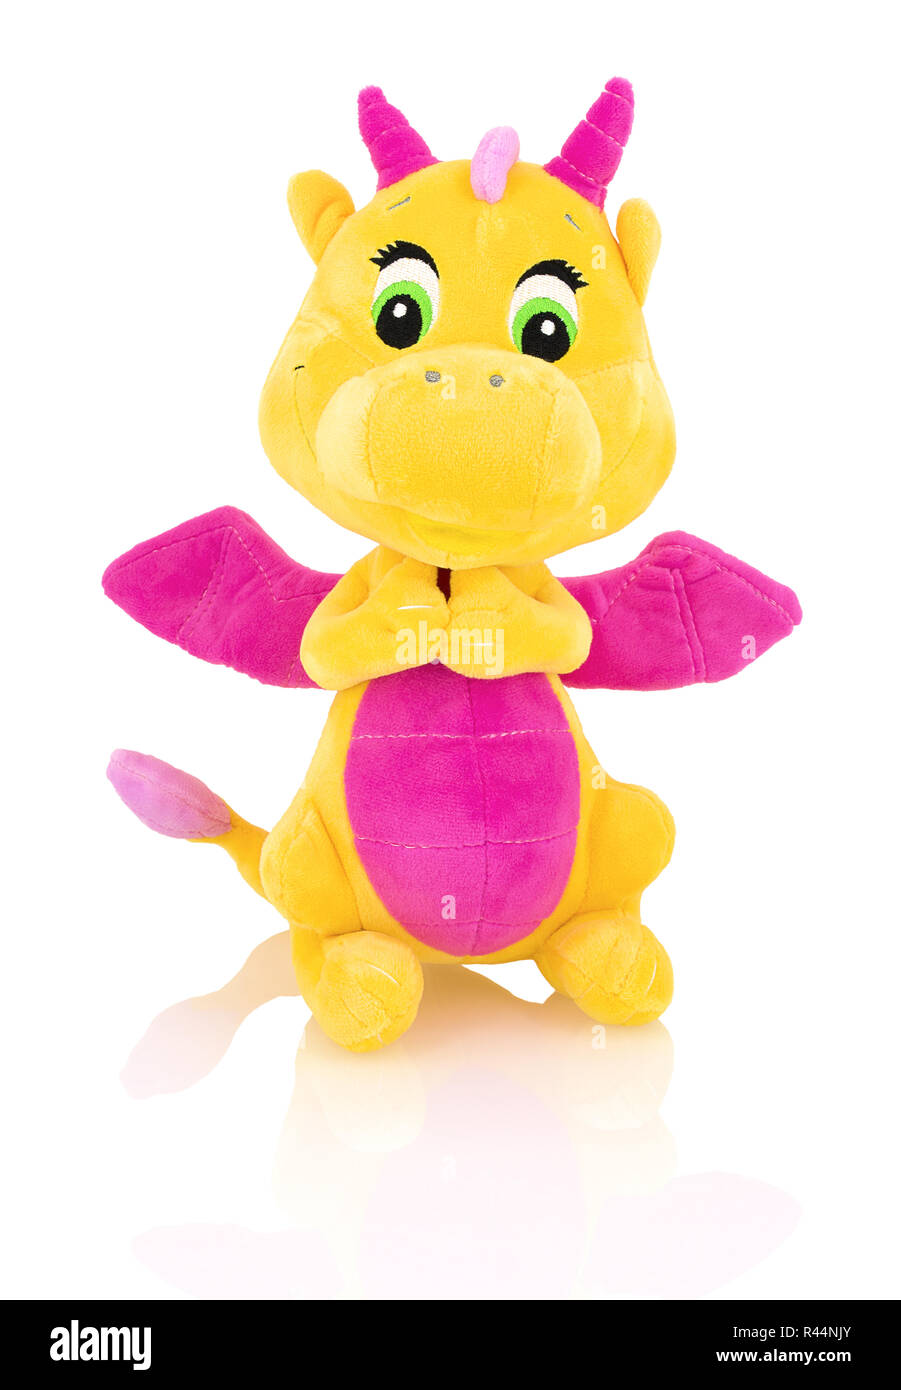 Dragon plushie doll isolated on white background with shadow reflection. Yellow stuffed dragon with purple horns and wings isolated on white backdrop. Stock Photo